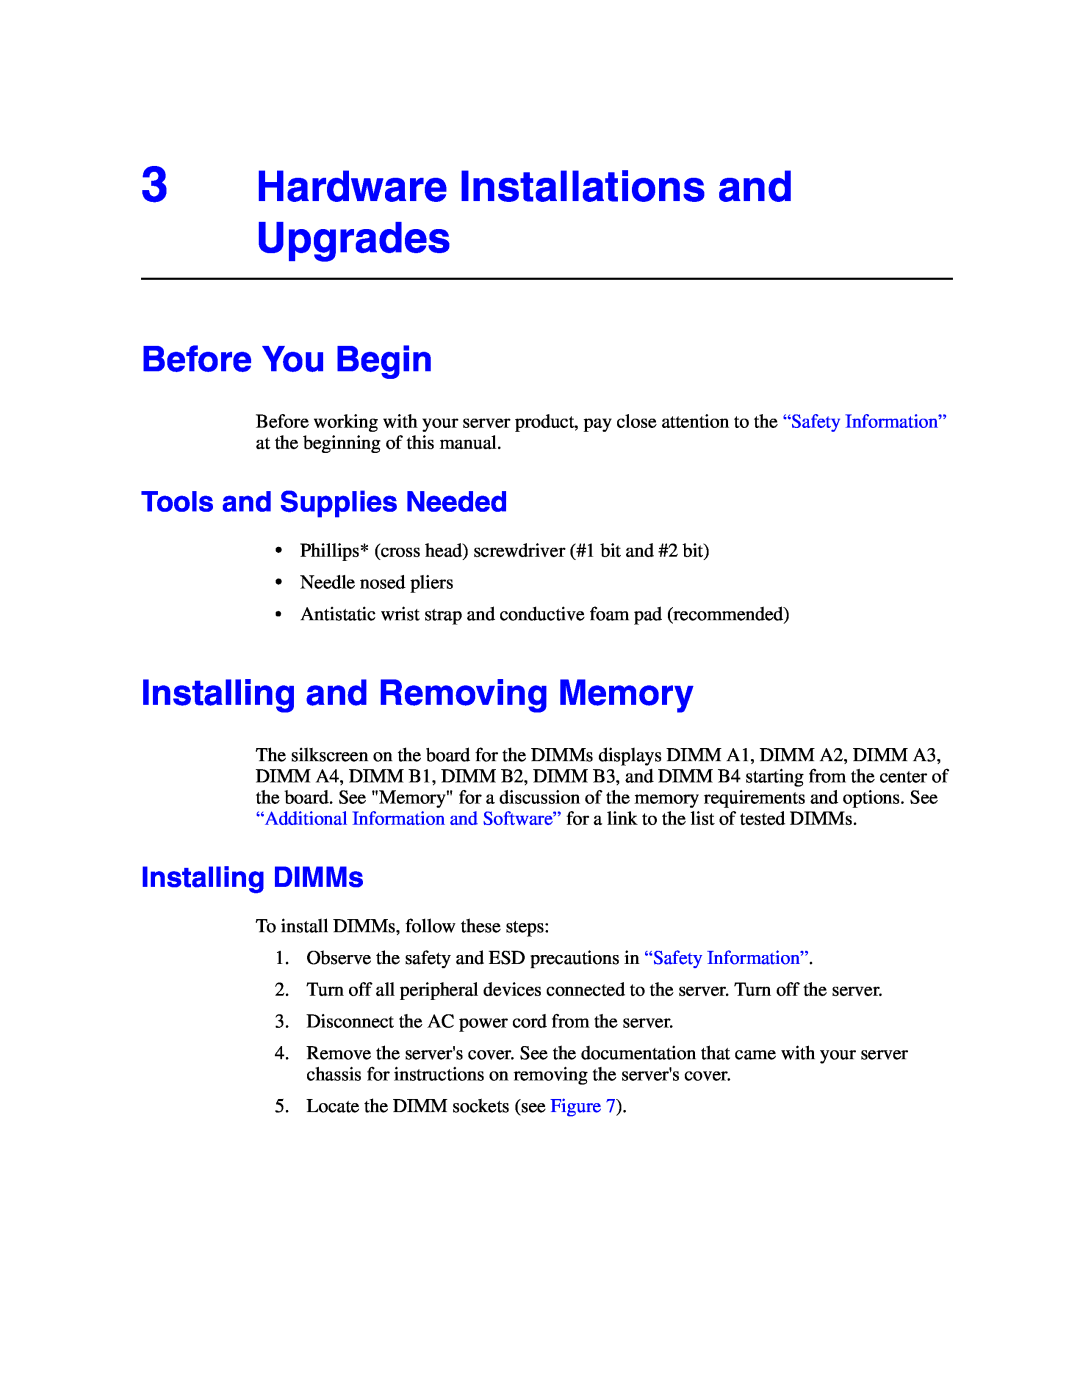 Intel S5000VSA Hardware Installations and Upgrades, Before You Begin, Installing and Removing Memory, Installing DIMMs 